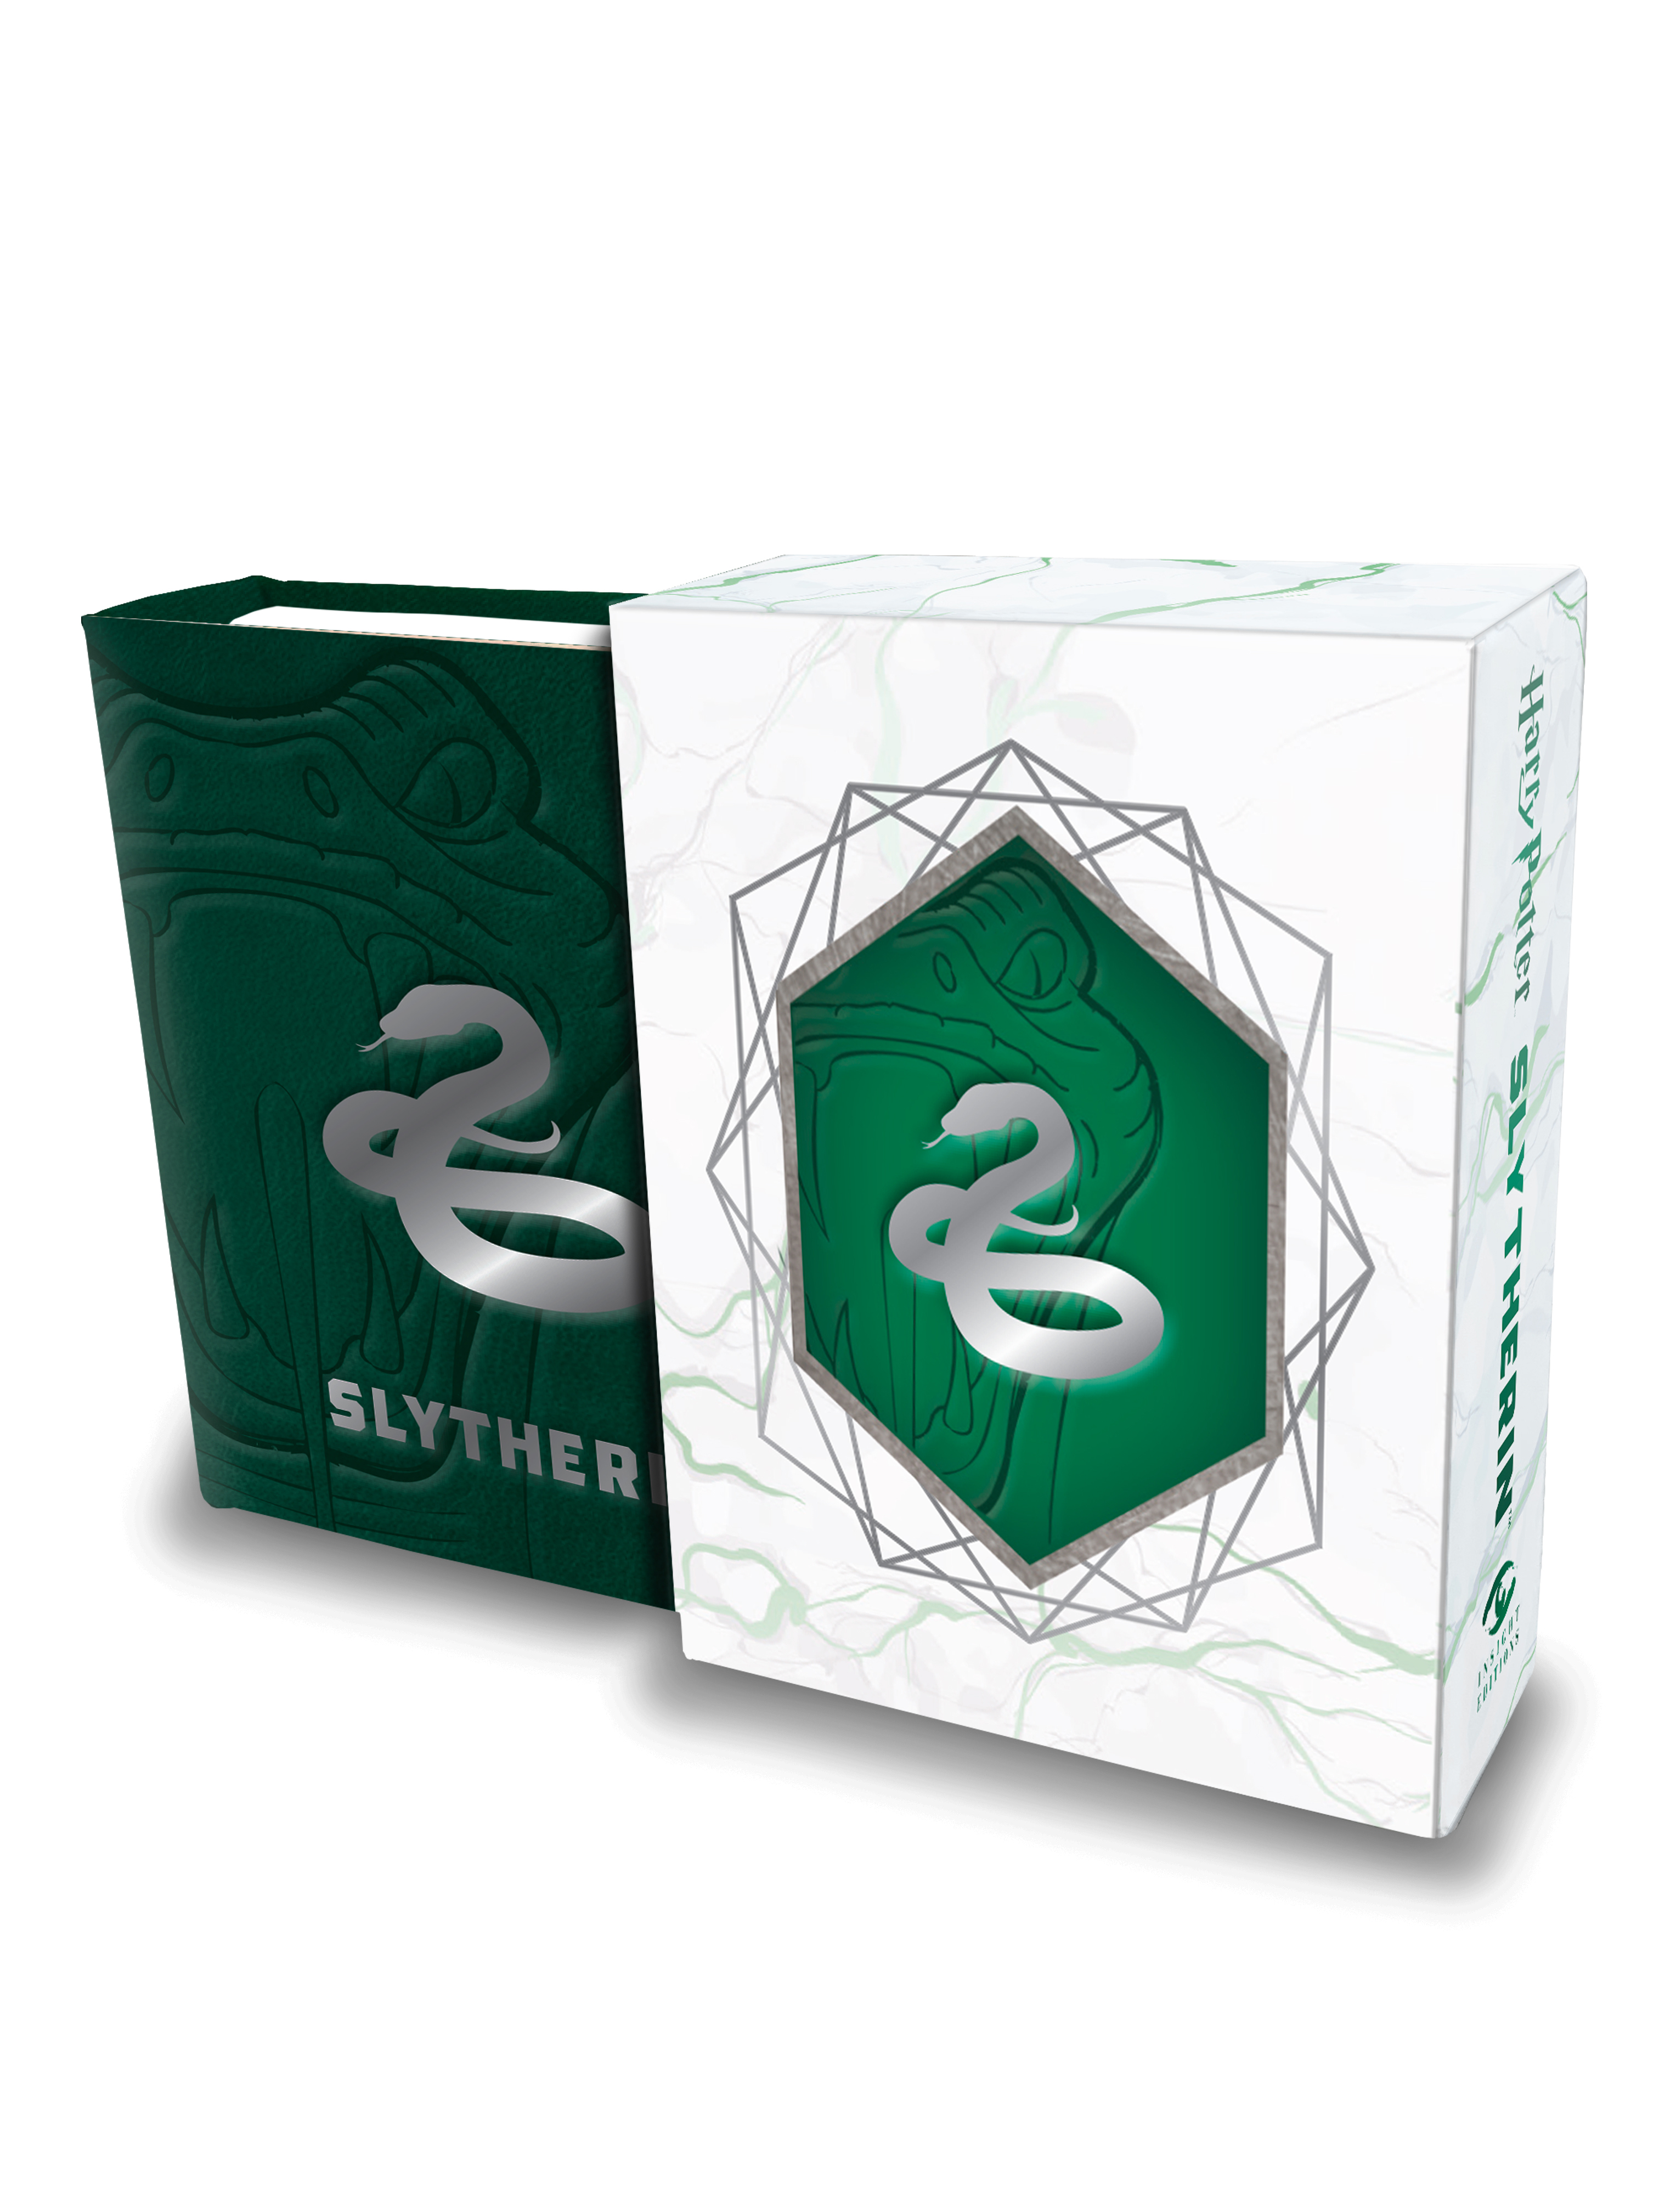 There is also a pocket book companion for Slytherin fans.